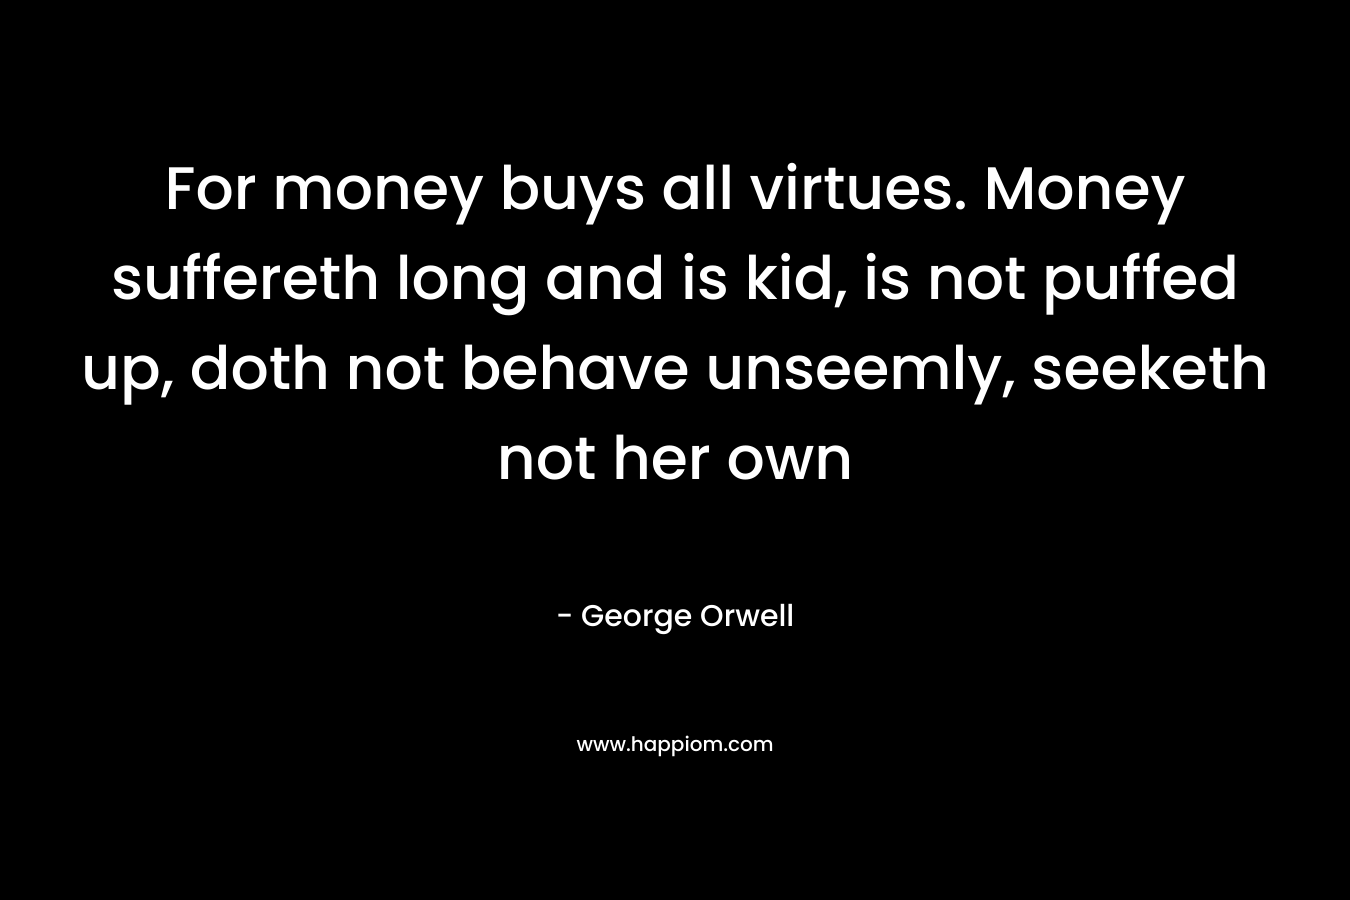 For money buys all virtues. Money suffereth long and is kid, is not puffed up, doth not behave unseemly, seeketh not her own – George Orwell